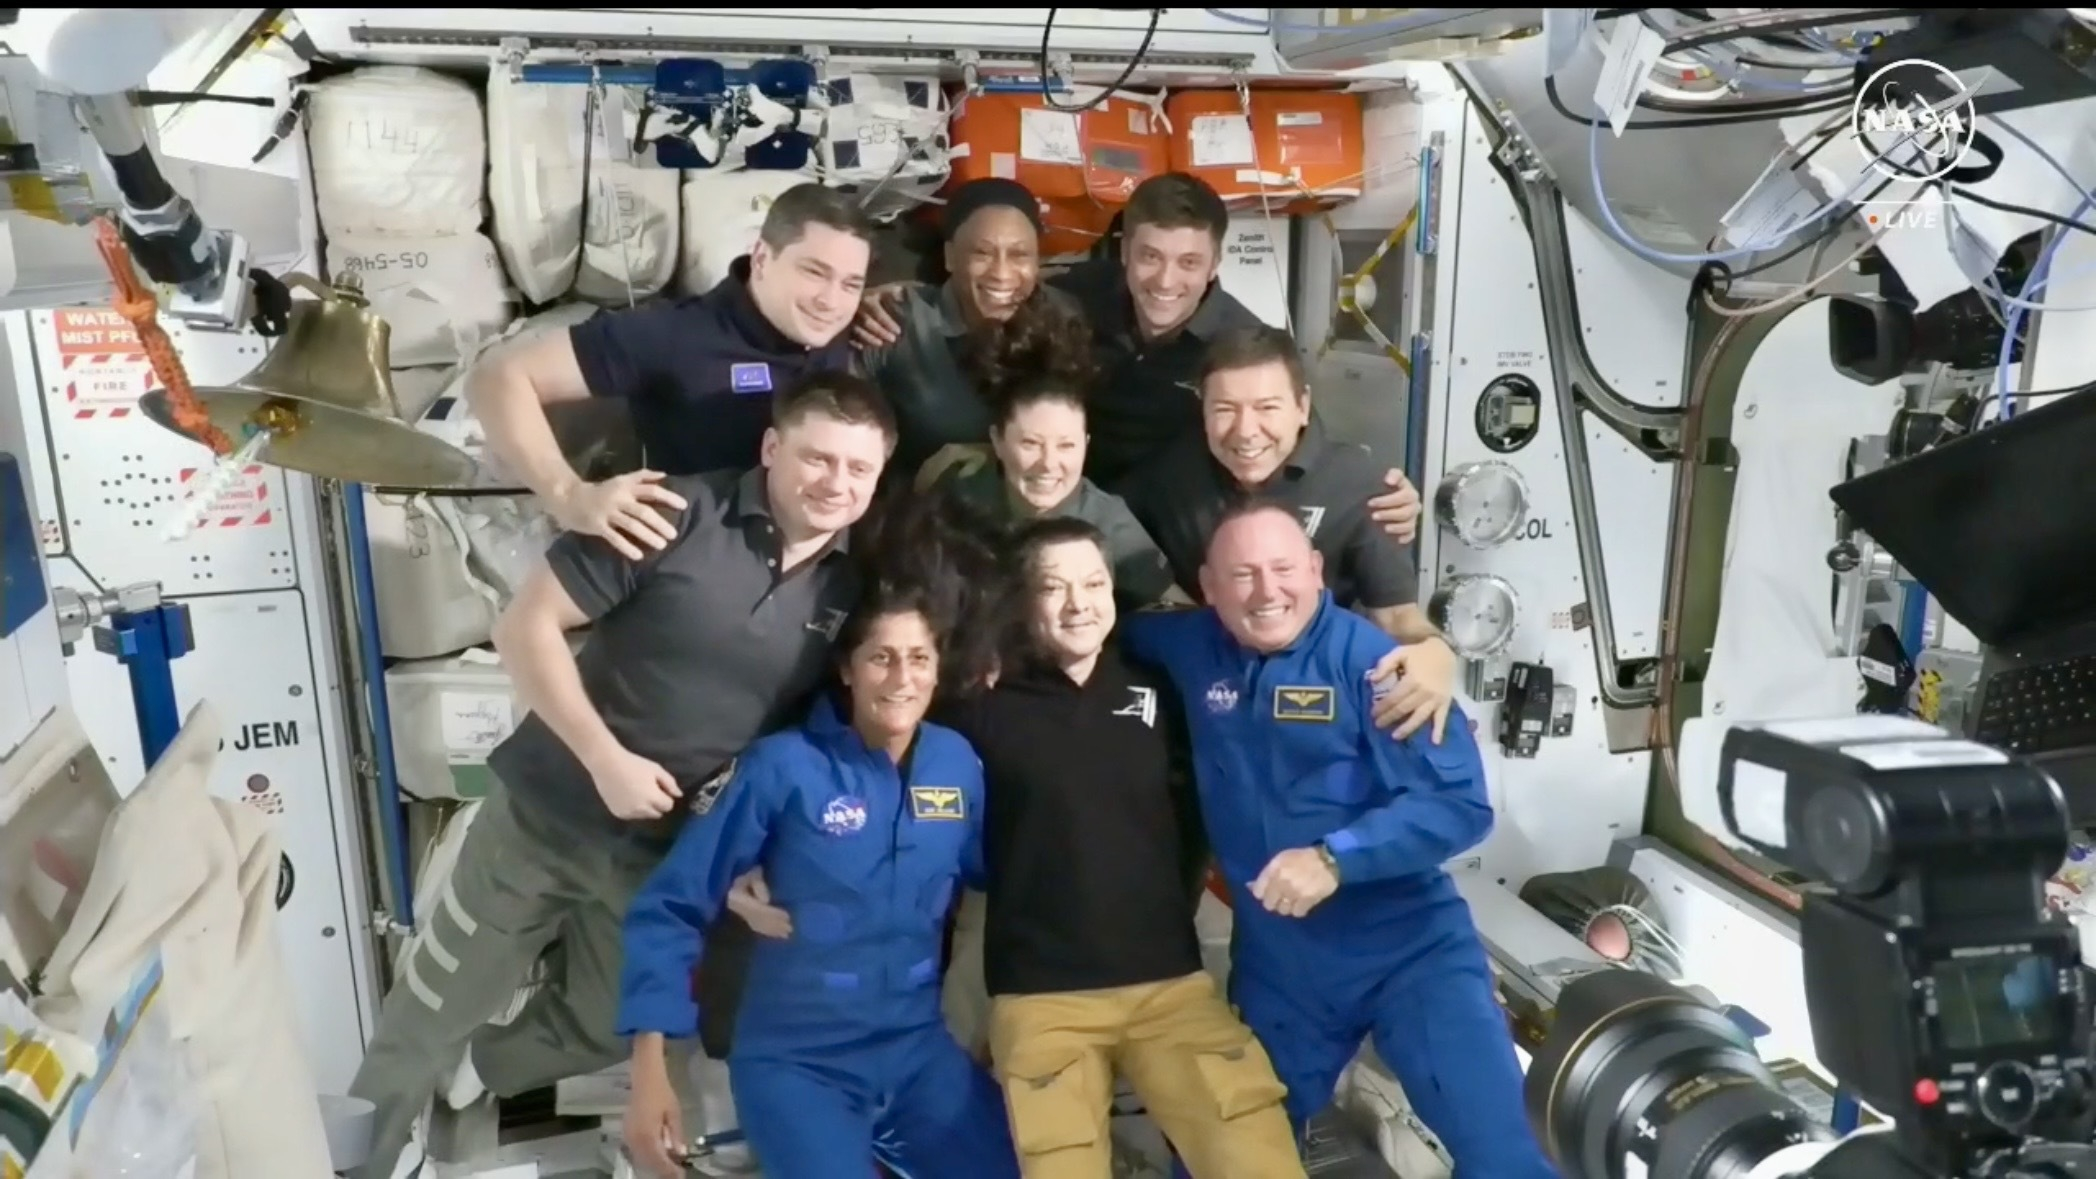 Nine astronauts float in a mostly white space station module, all smiling for a photo.